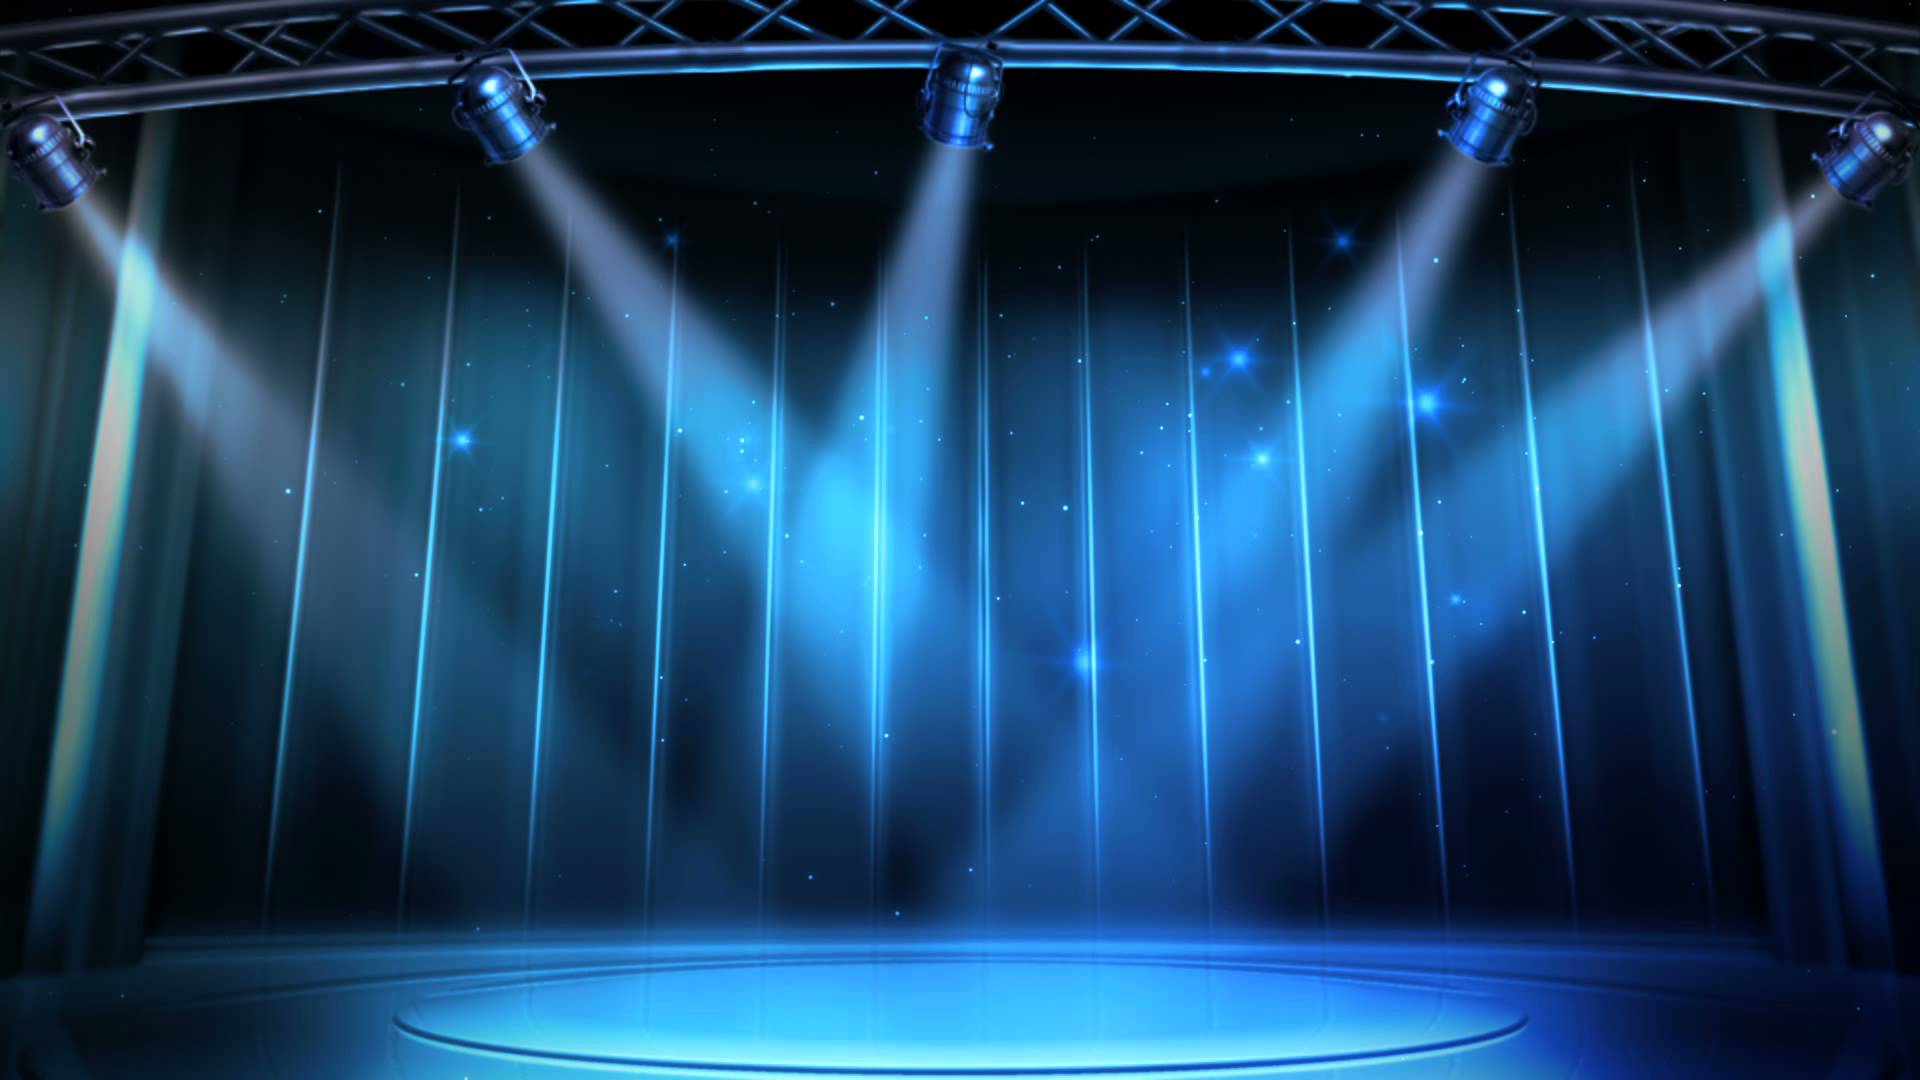 Stage backgrounds